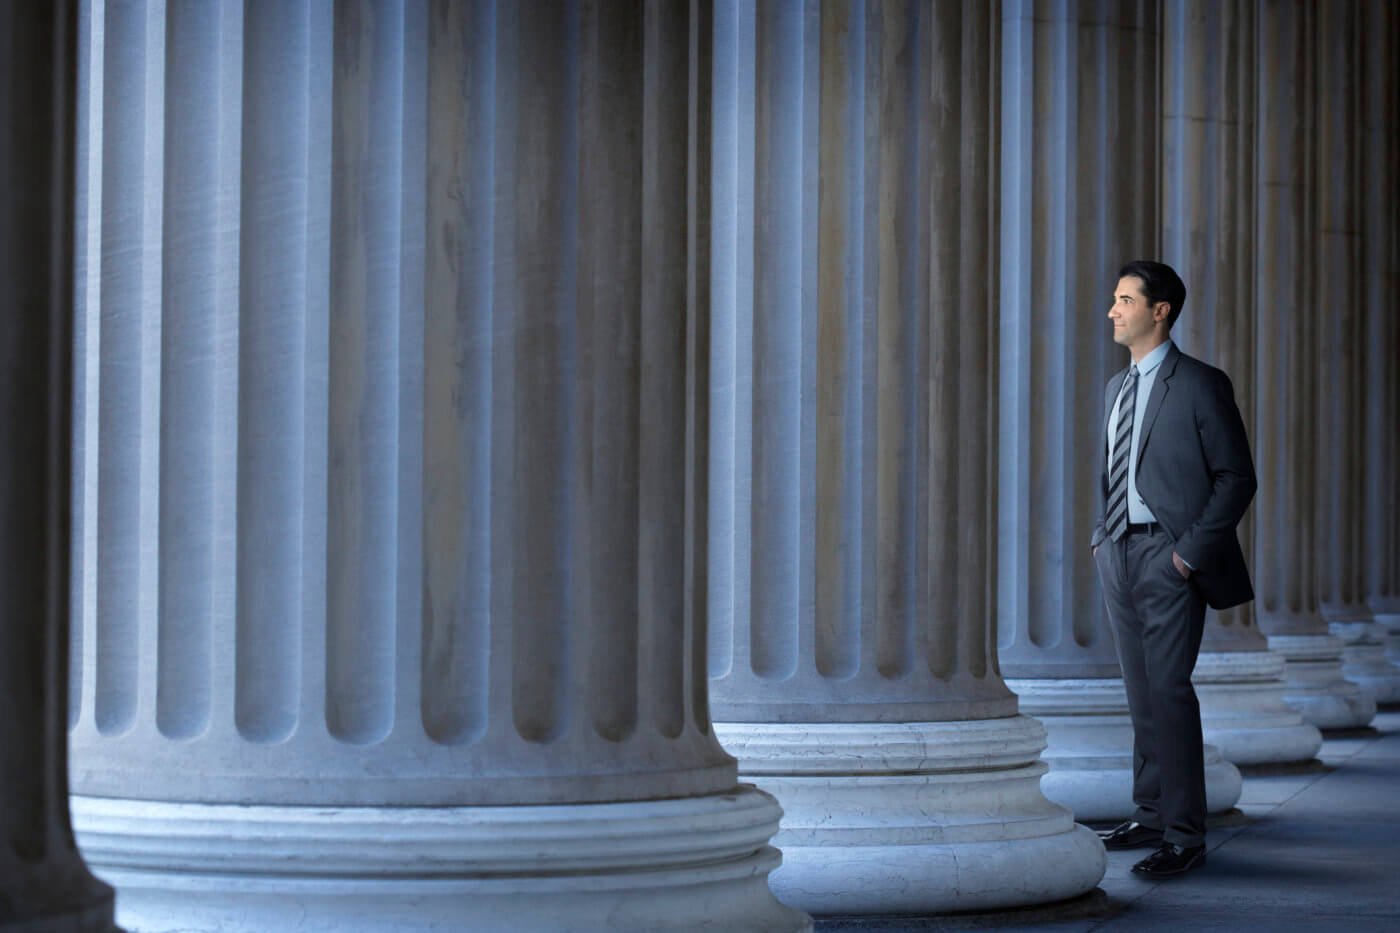 A lawyer, banker, or businessman standing among large columns looking out into the distance.